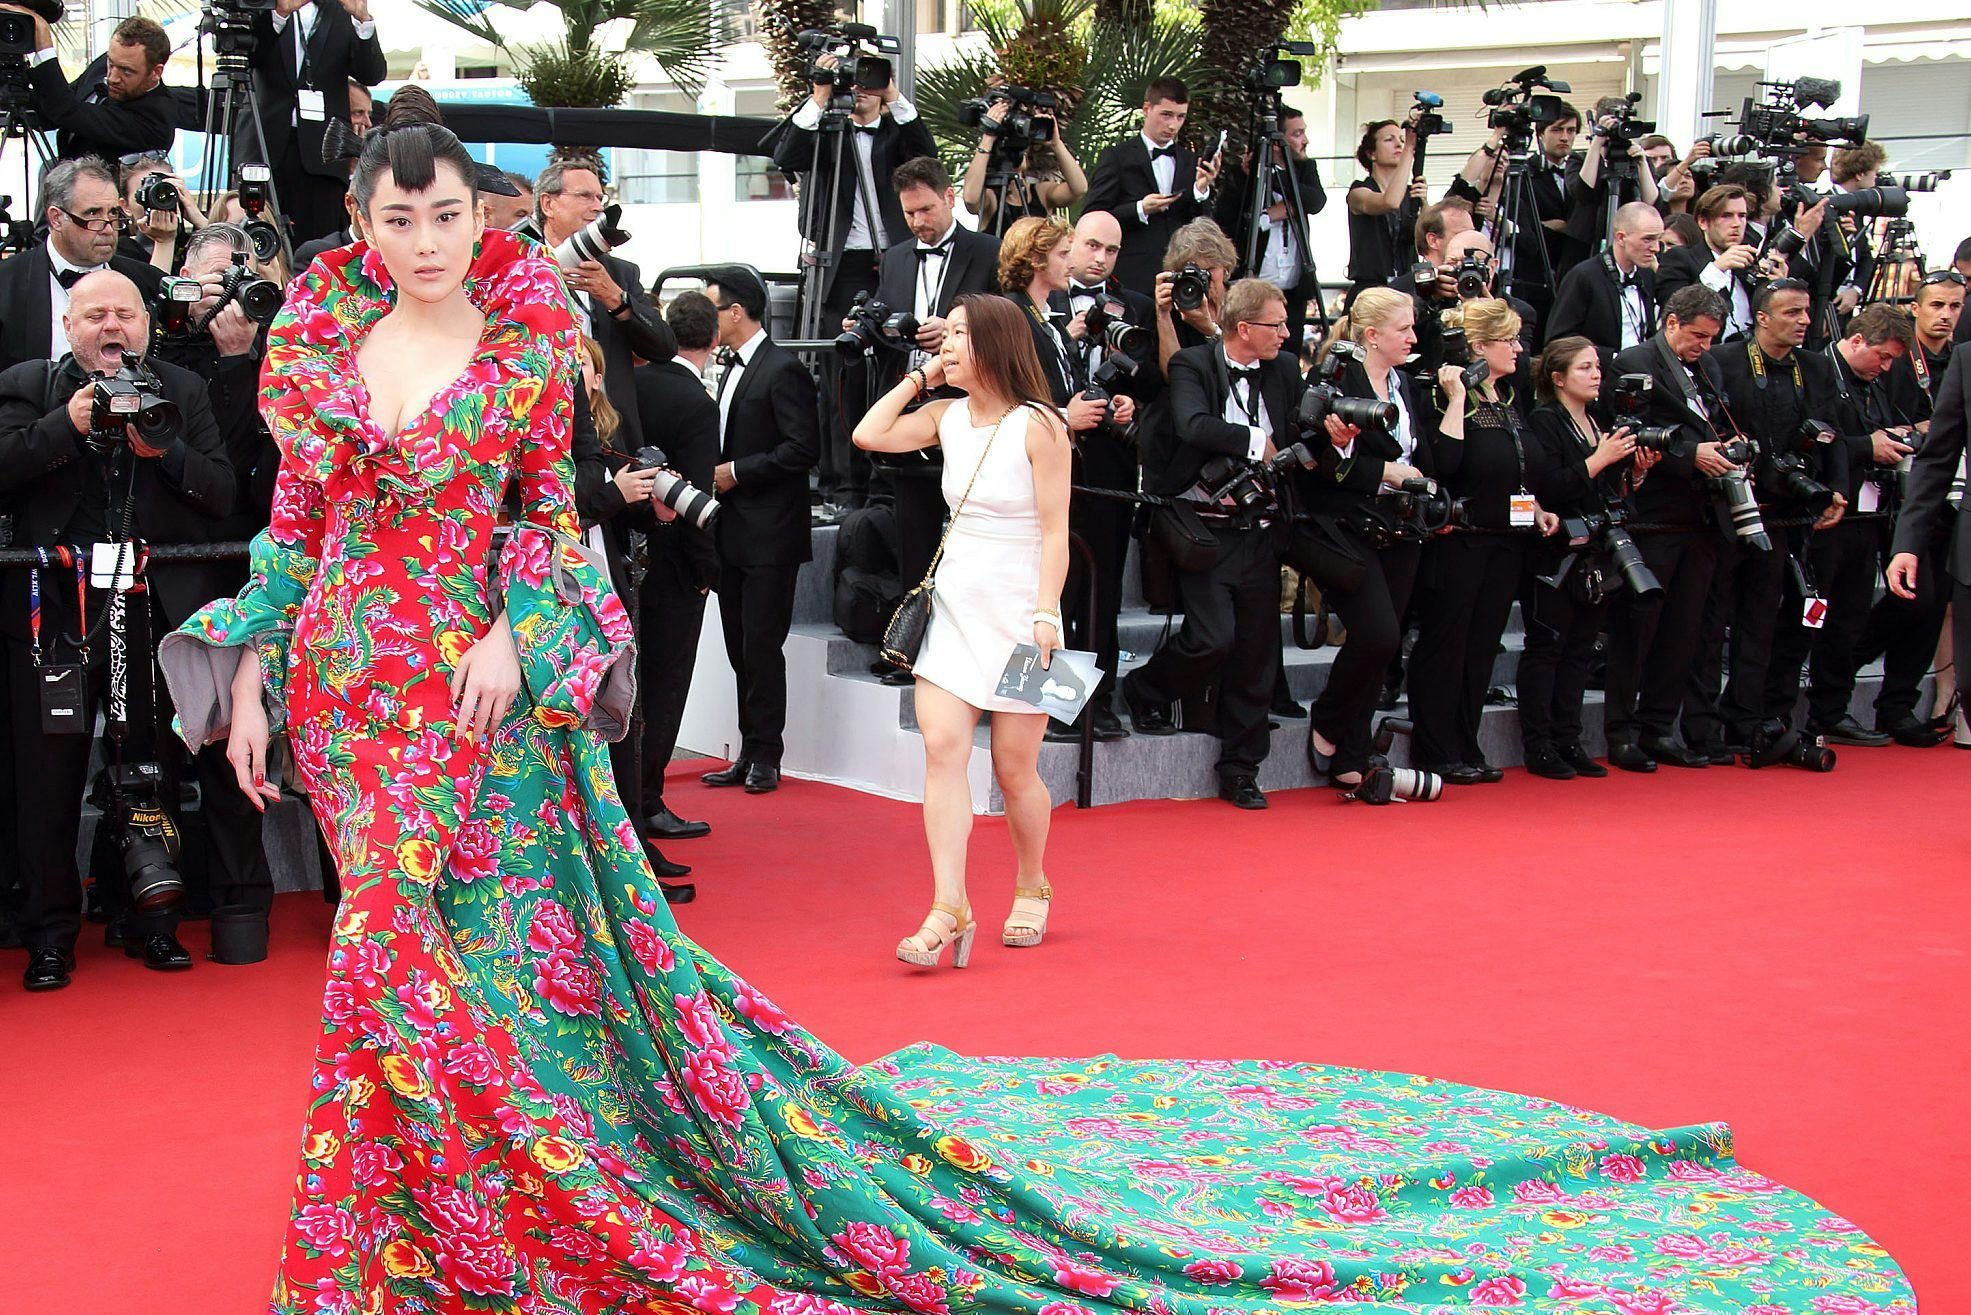 10 Standout Fashion Moments for Chinese Stars in the History of Cannes